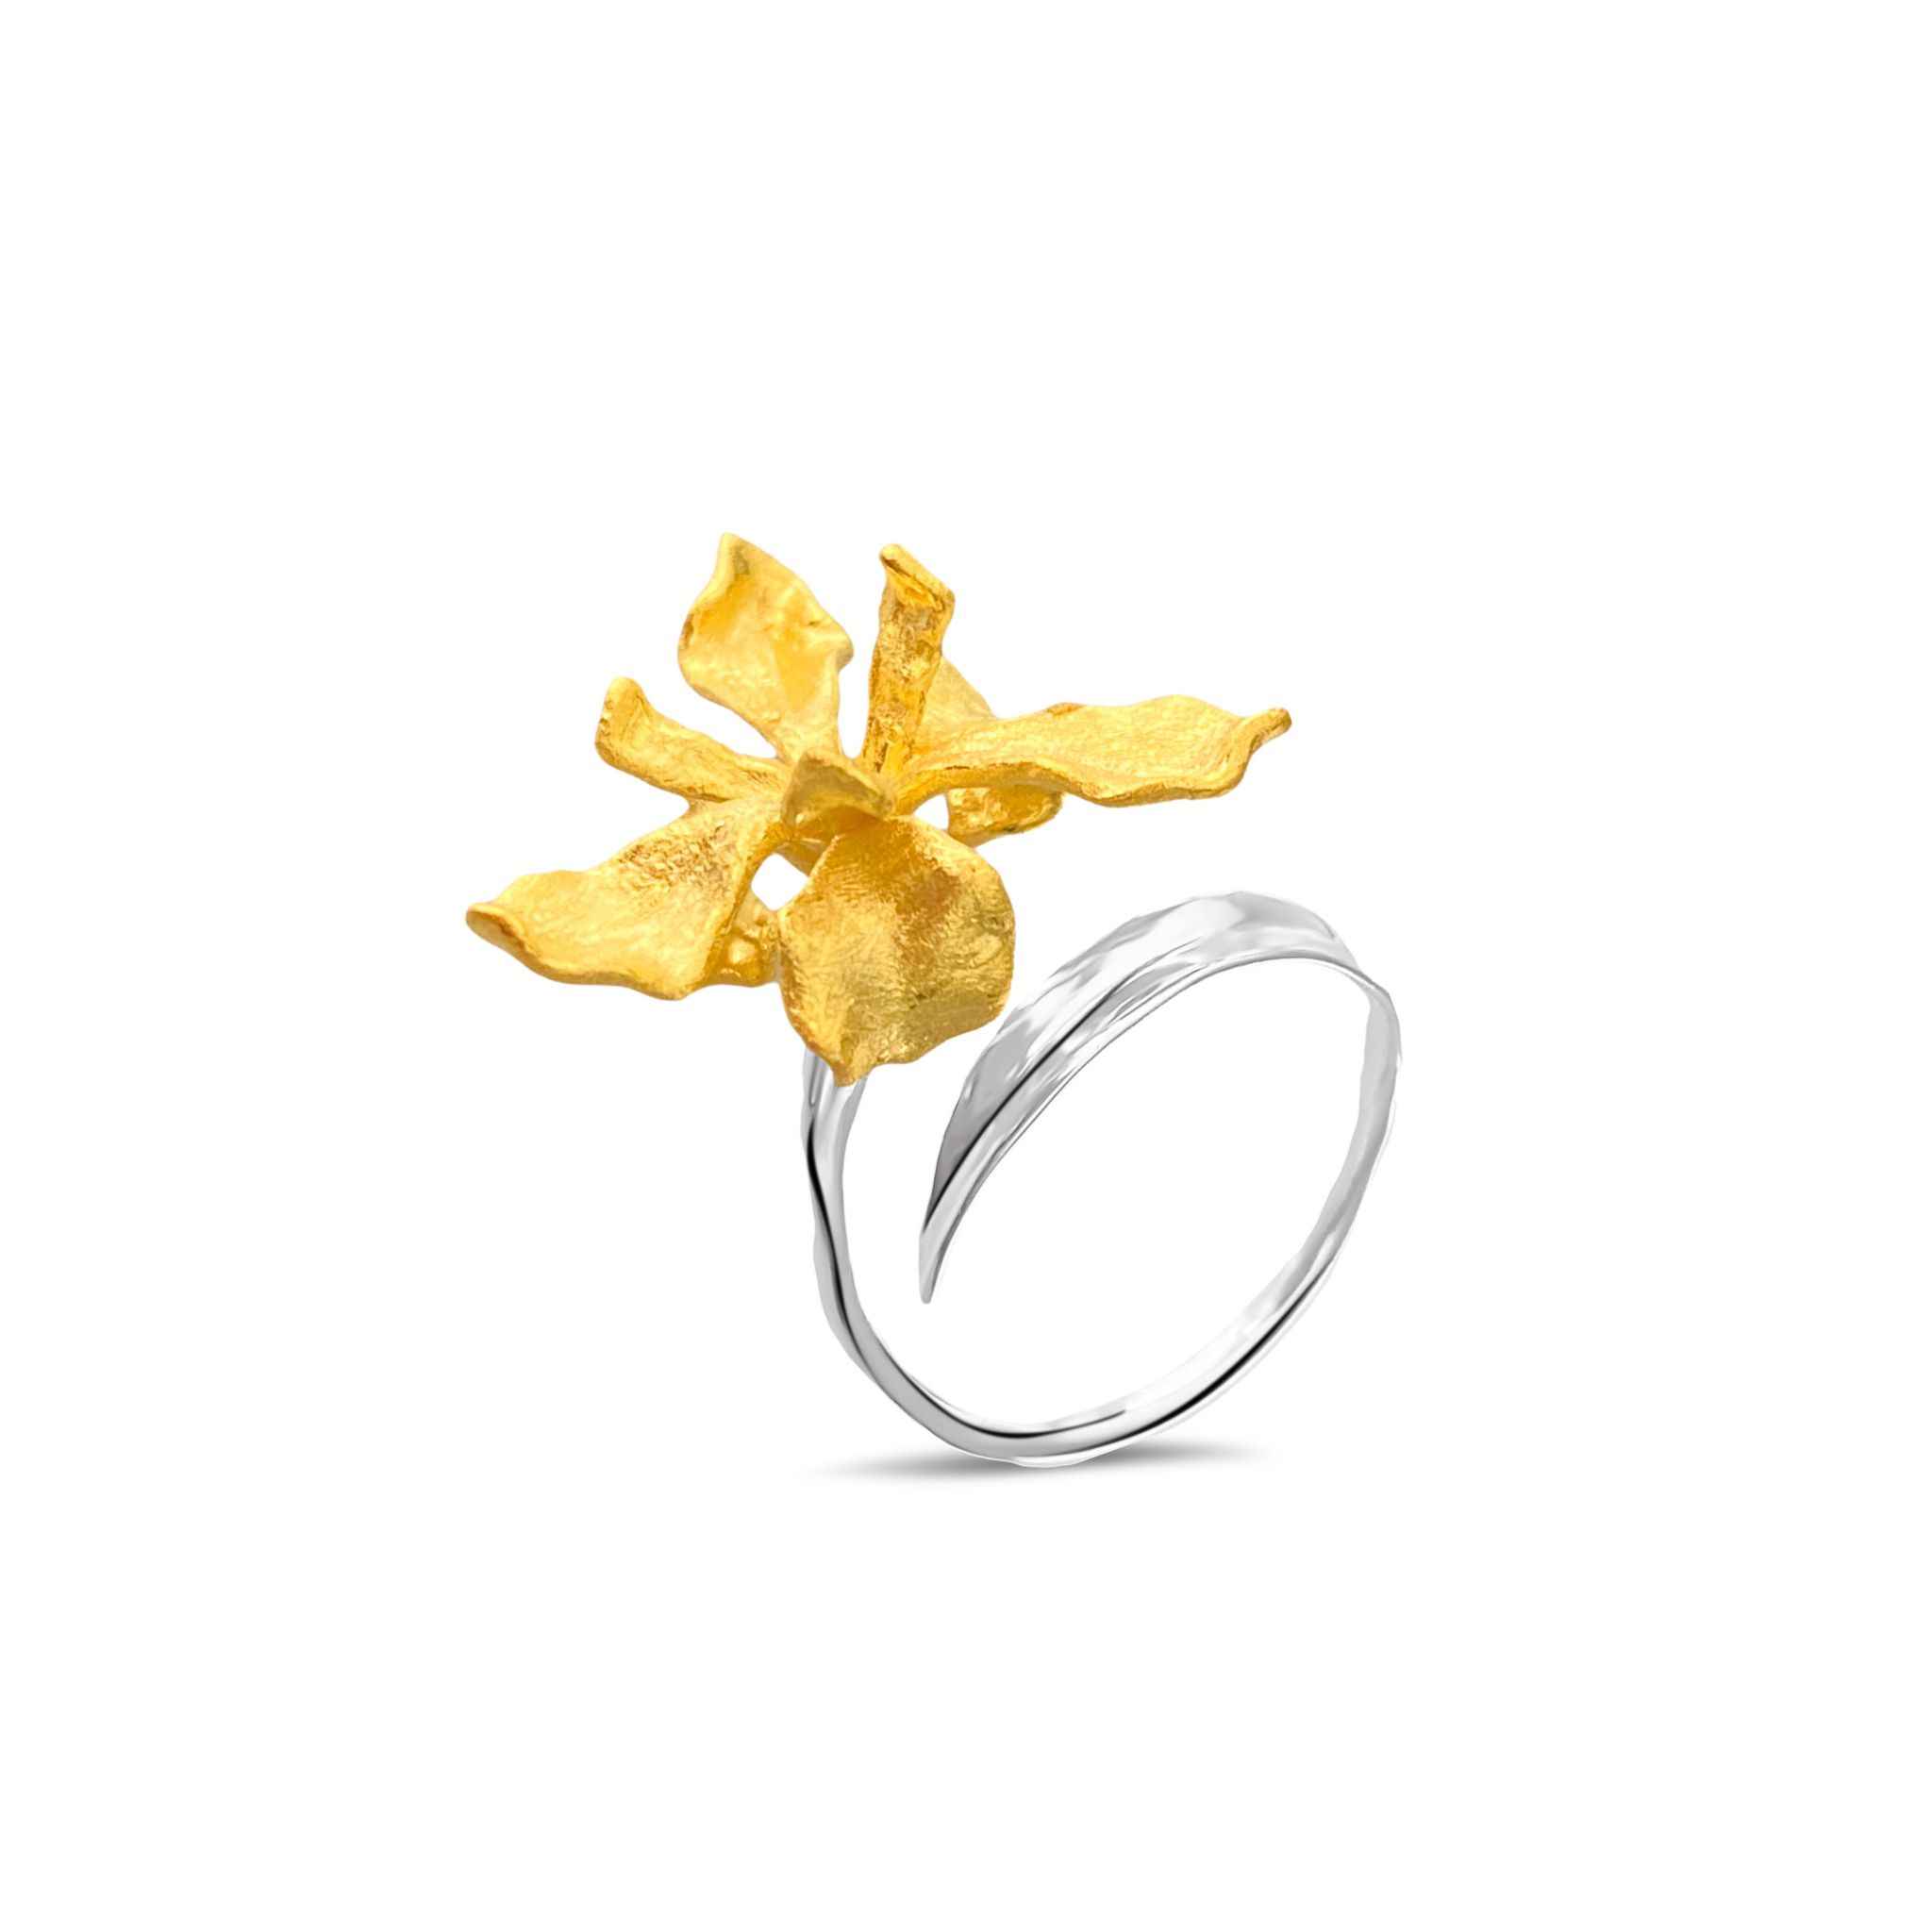 Sophisticated Iris Cocktail Ring in Gold showcasing intricate leaf-like band design and handcrafted petals.